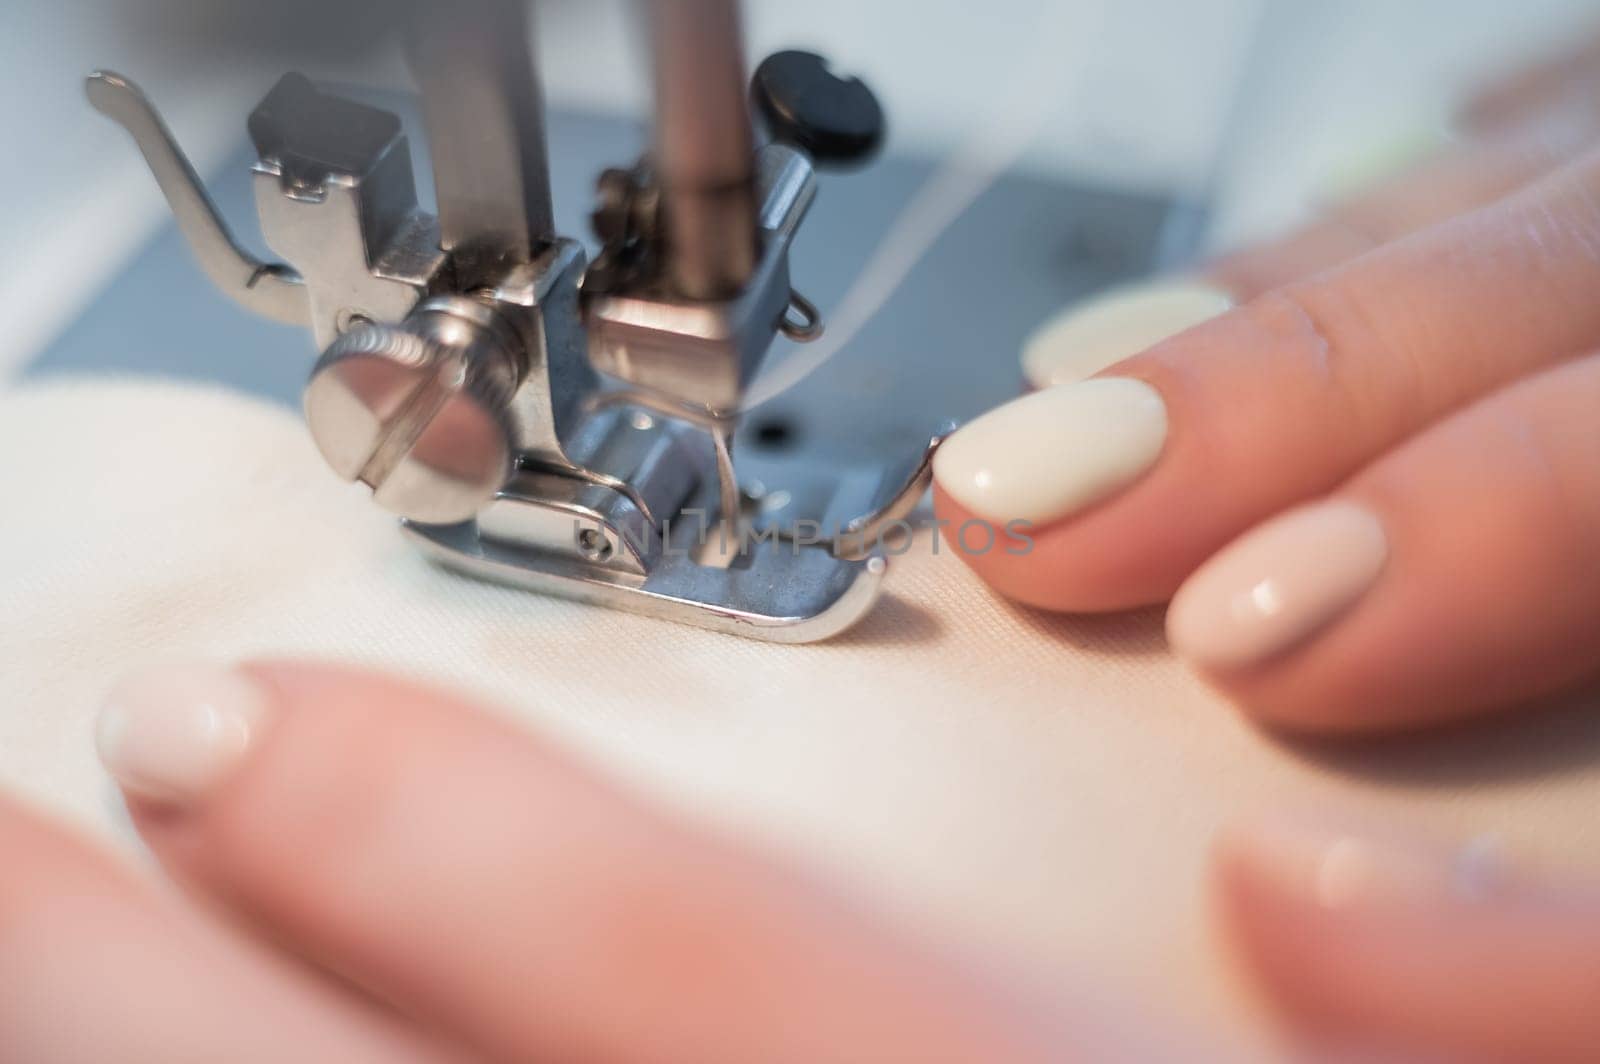 Close-up. A woman works on an electric sewing machine at home.